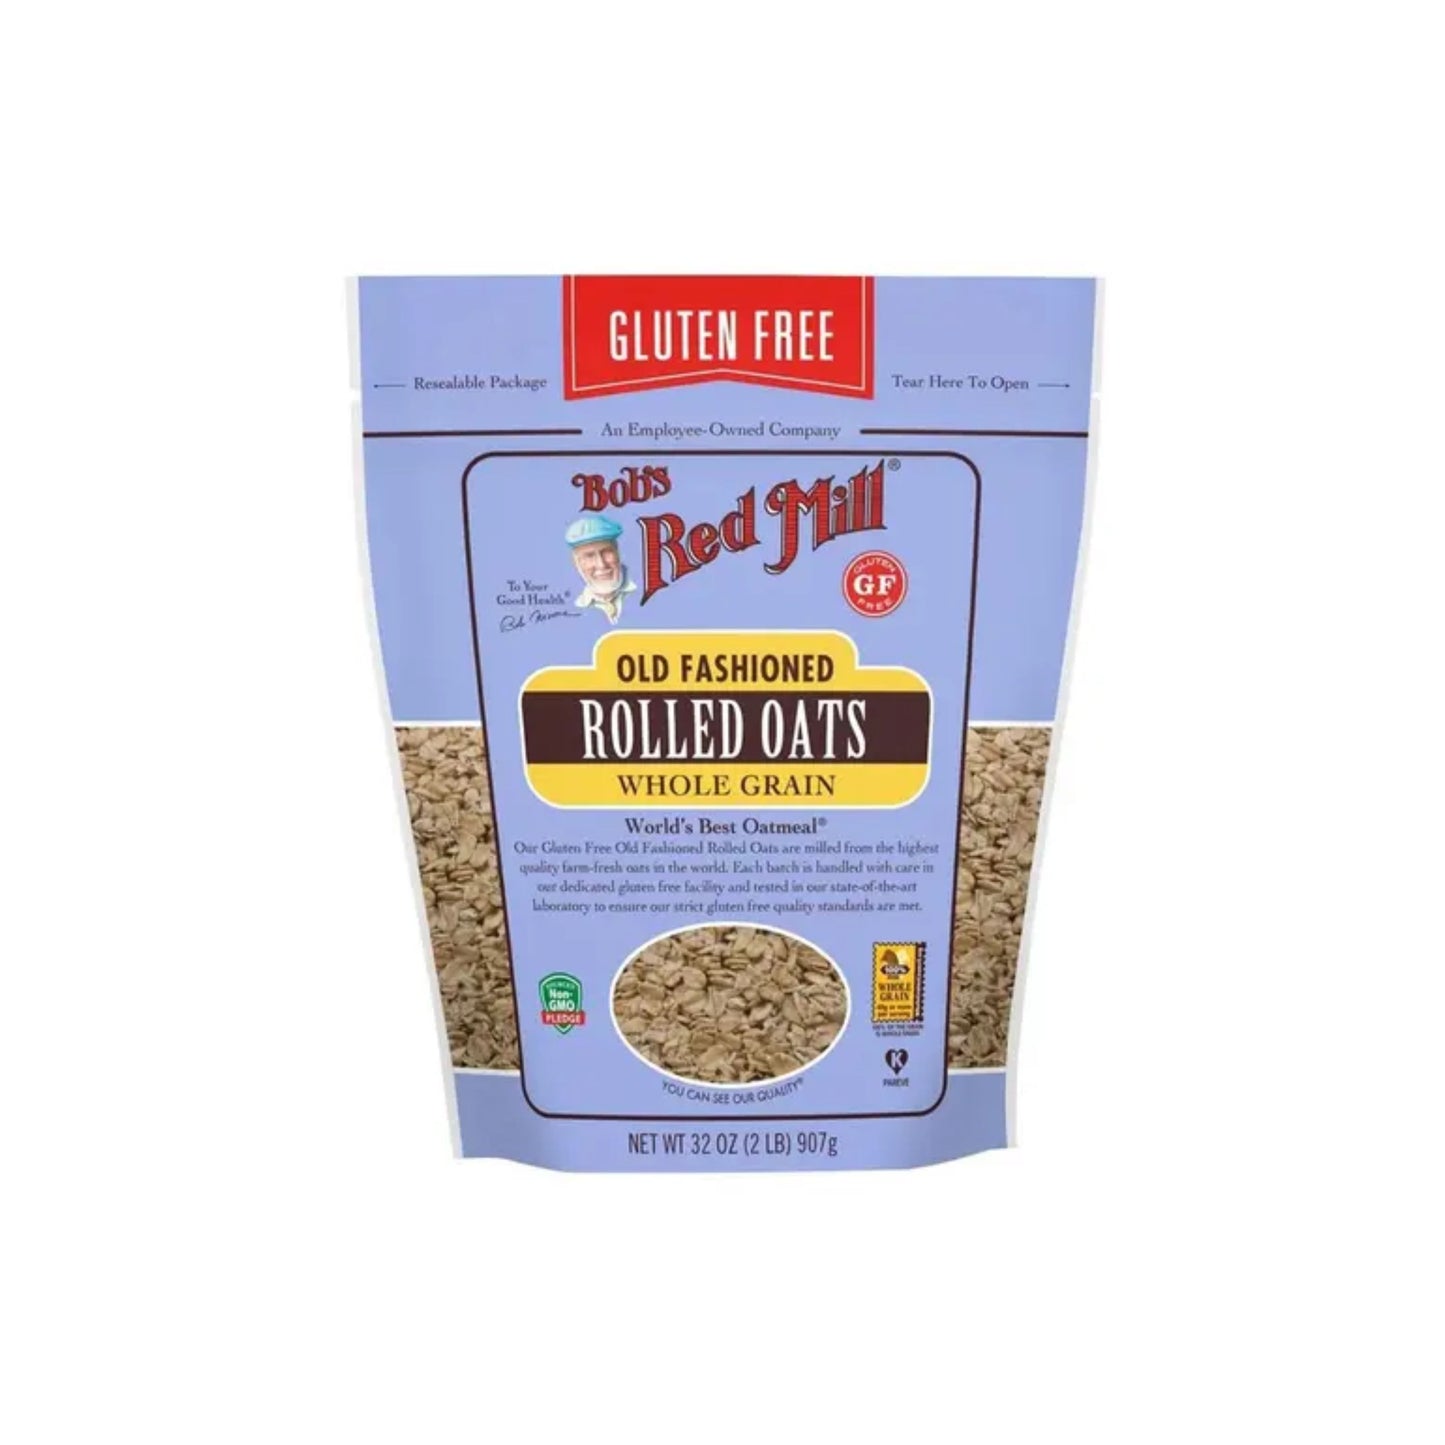 Bob's Red Mill Old Fashioned Rolled Oats 2 lbs.